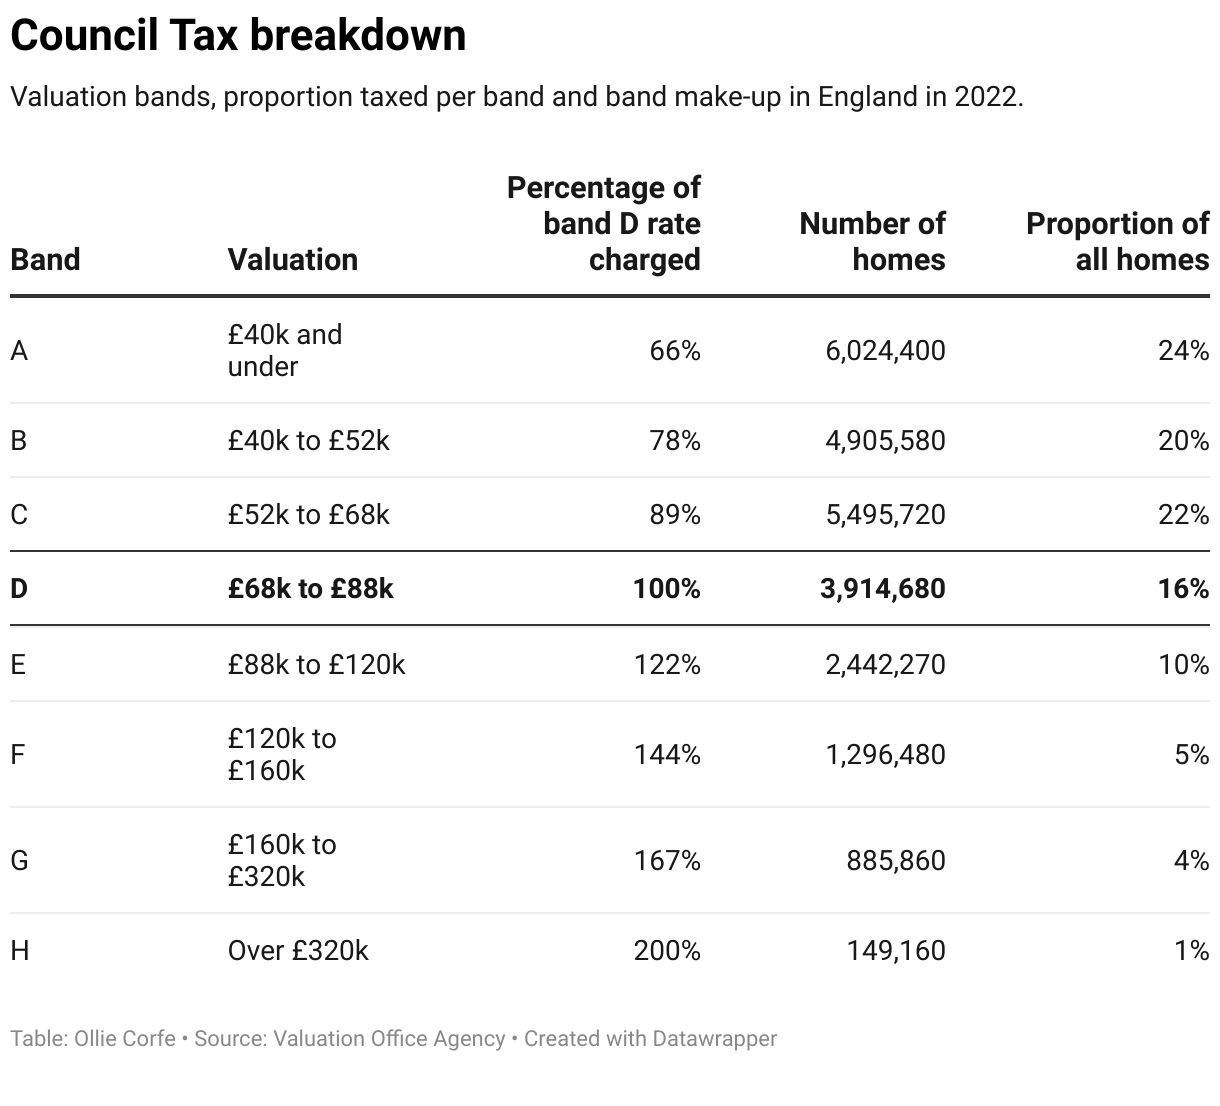 Table breaking down how Council tax is charged in England.